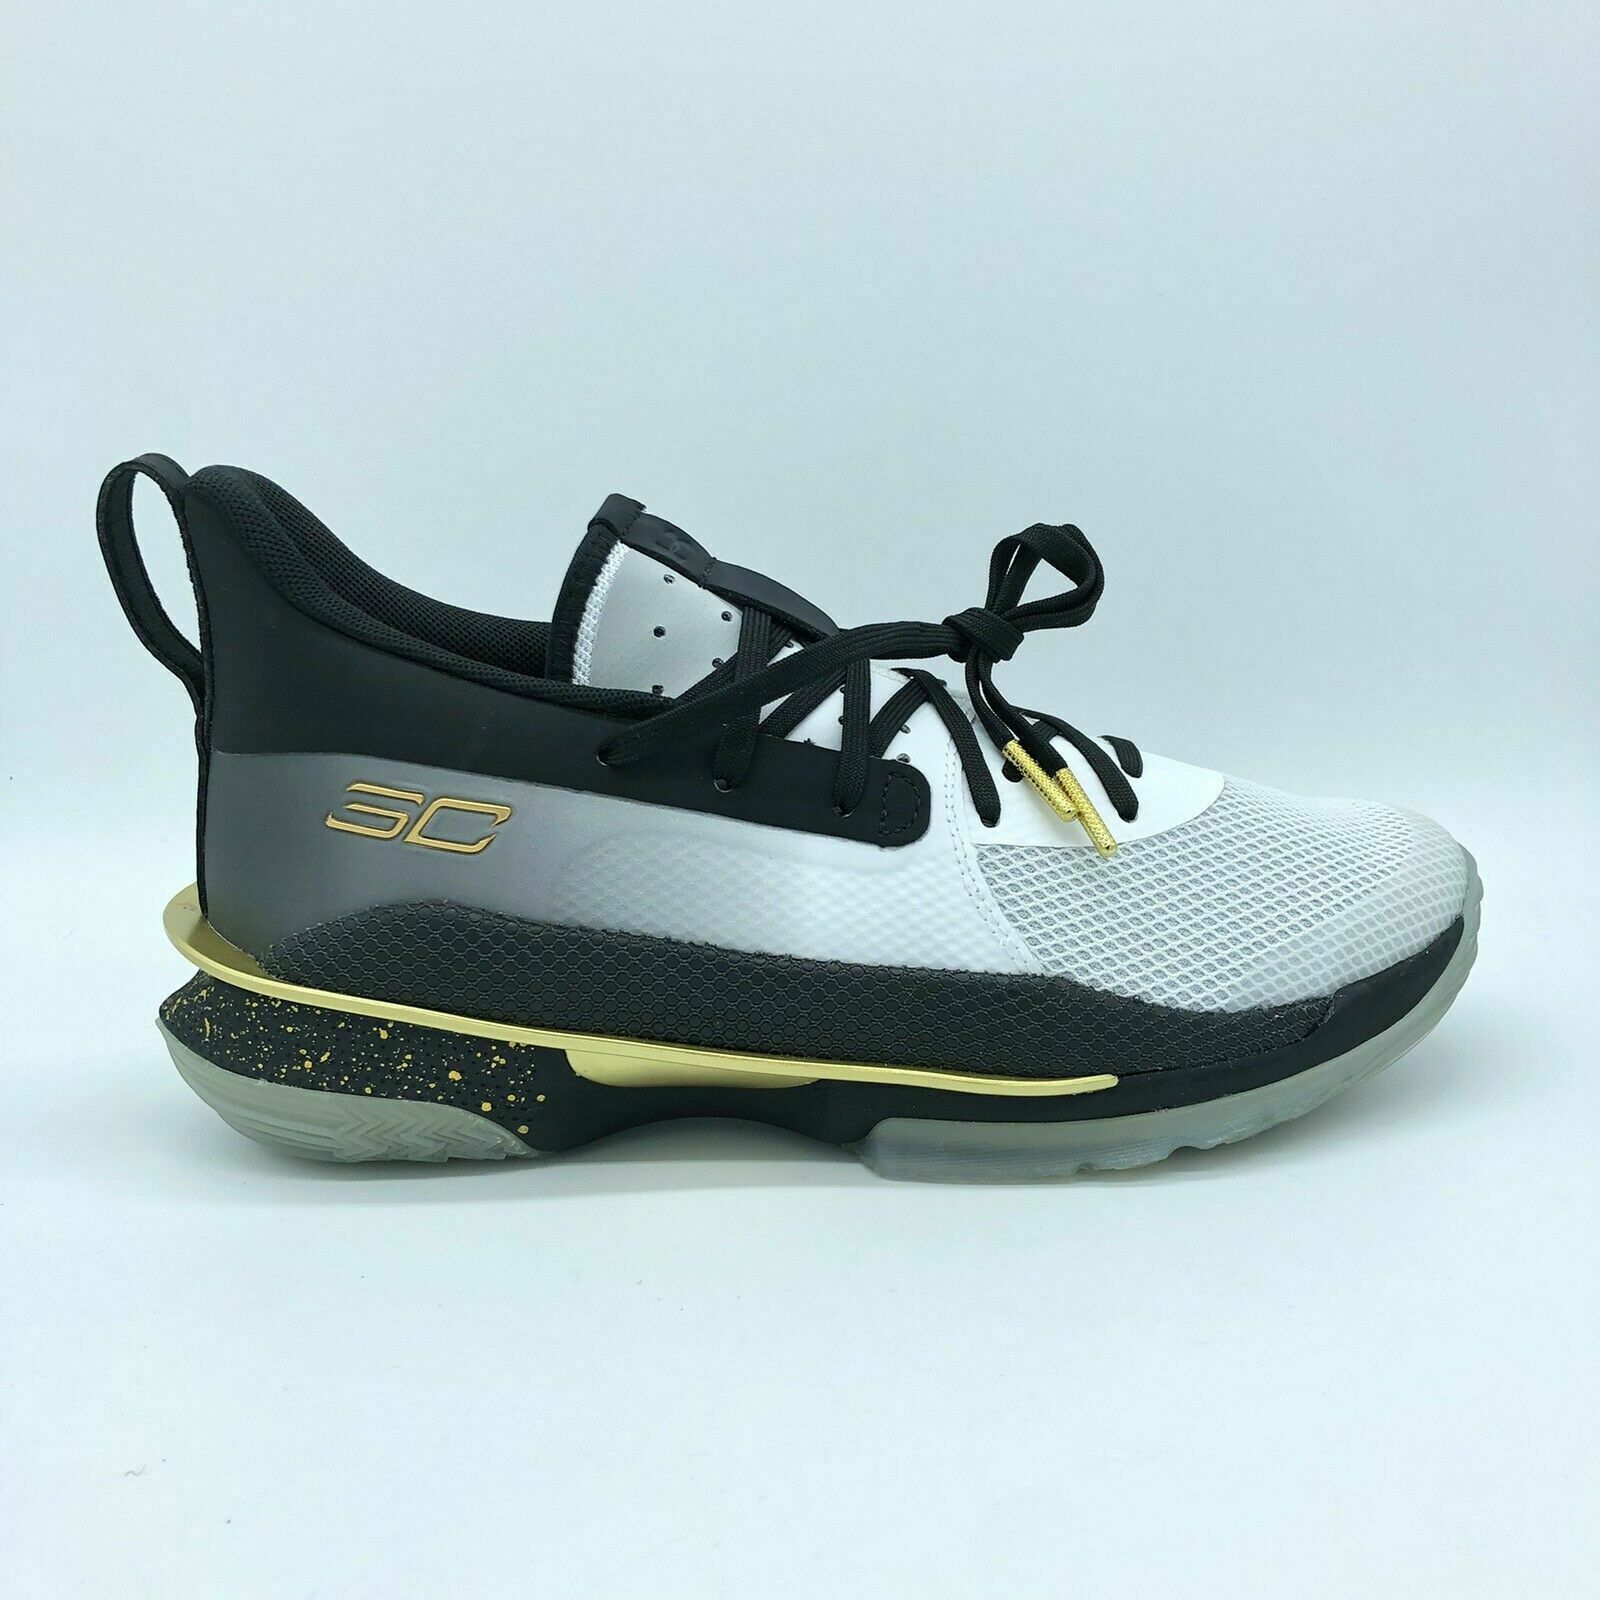 Under Armour Curry 7 Basketball Black Gold Shoes Stephen 3023300-104 Size 7